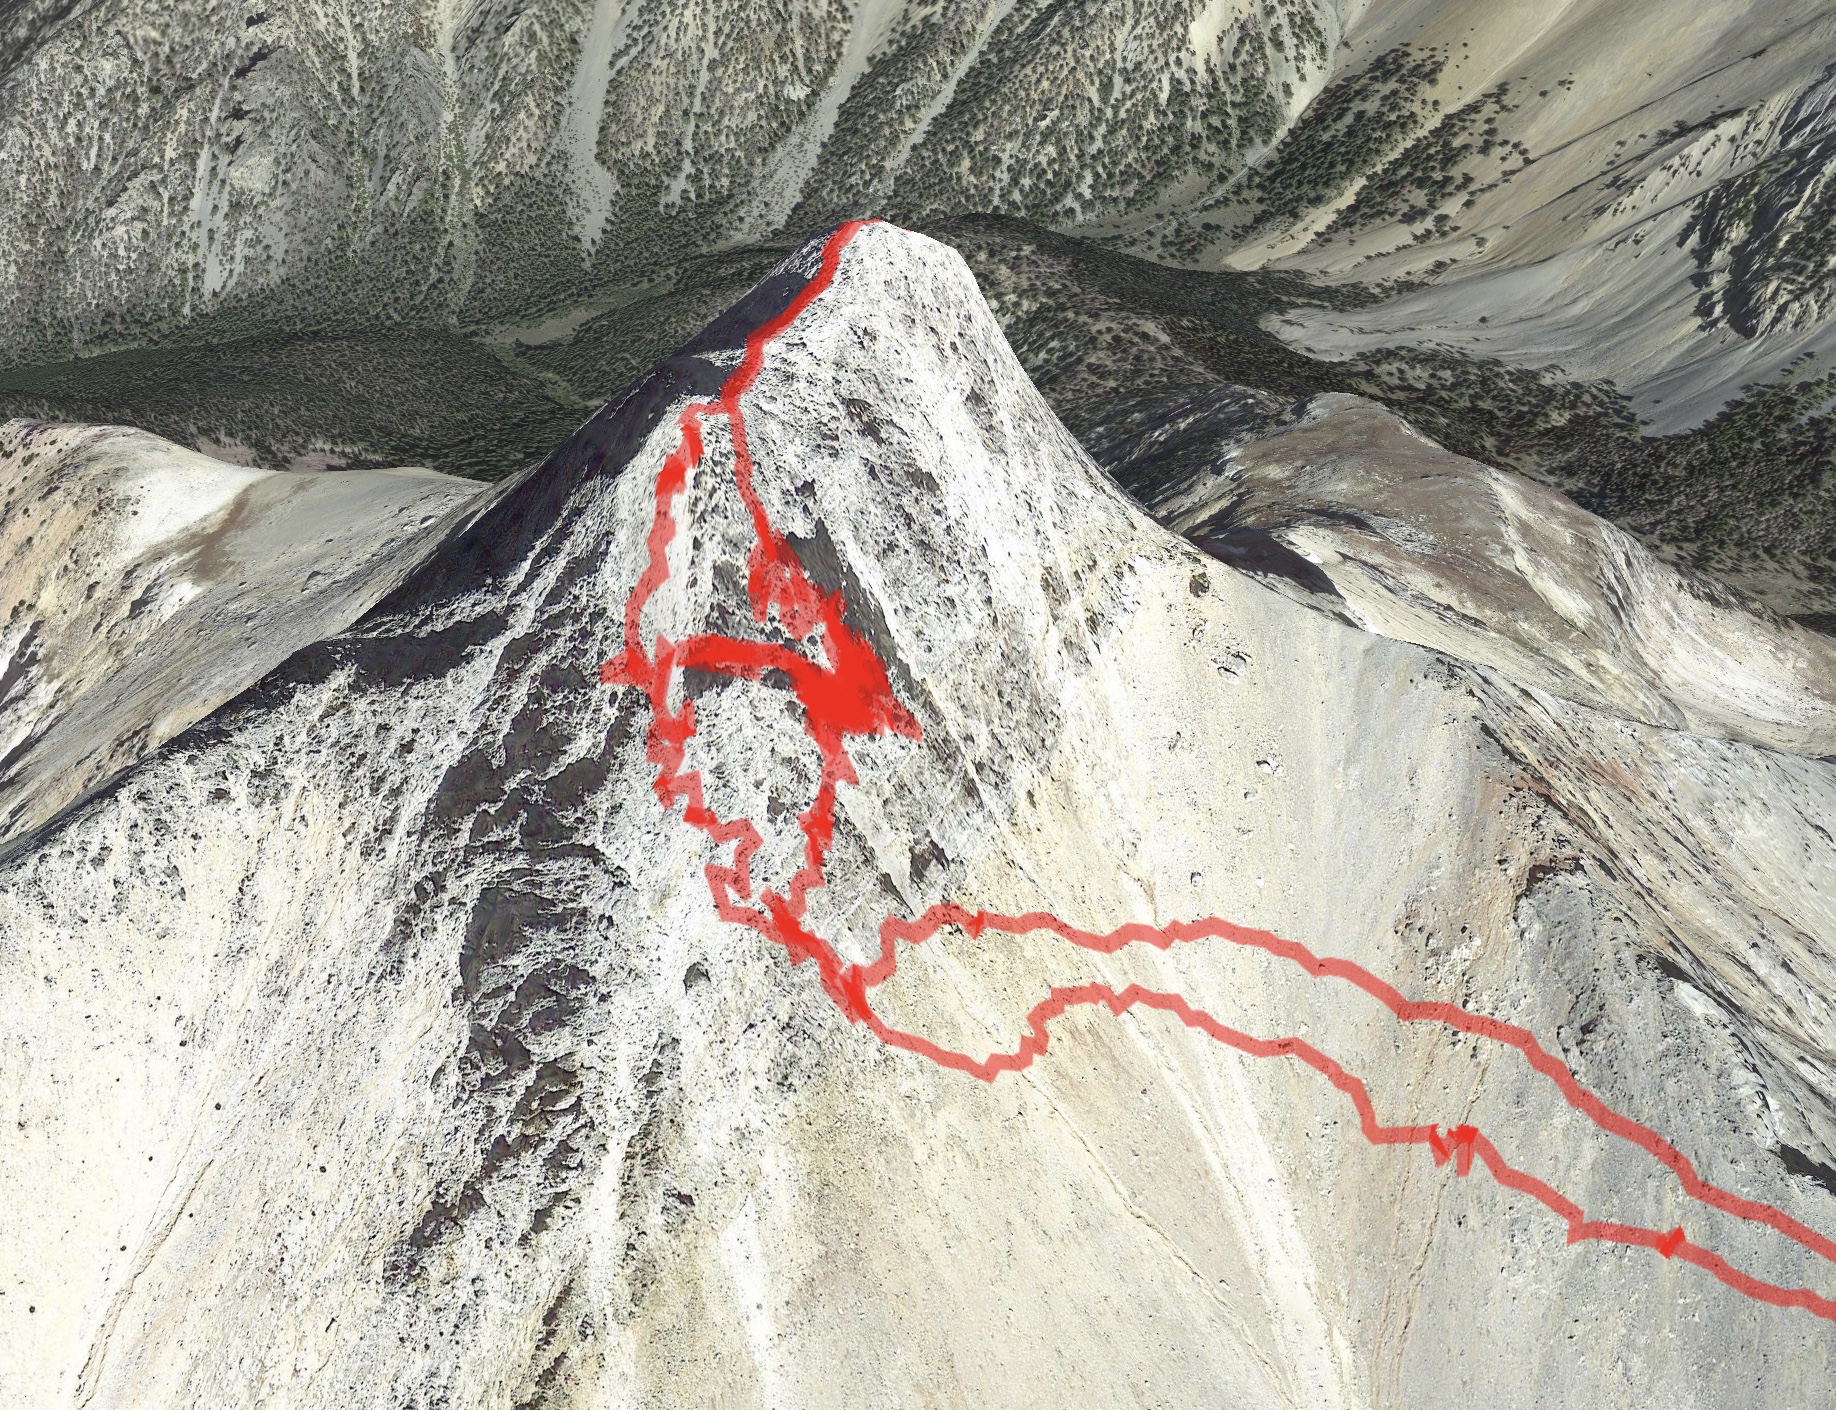 The GPS track superimposed on a Google Map image. The Class 4 ascent route is the higher line.